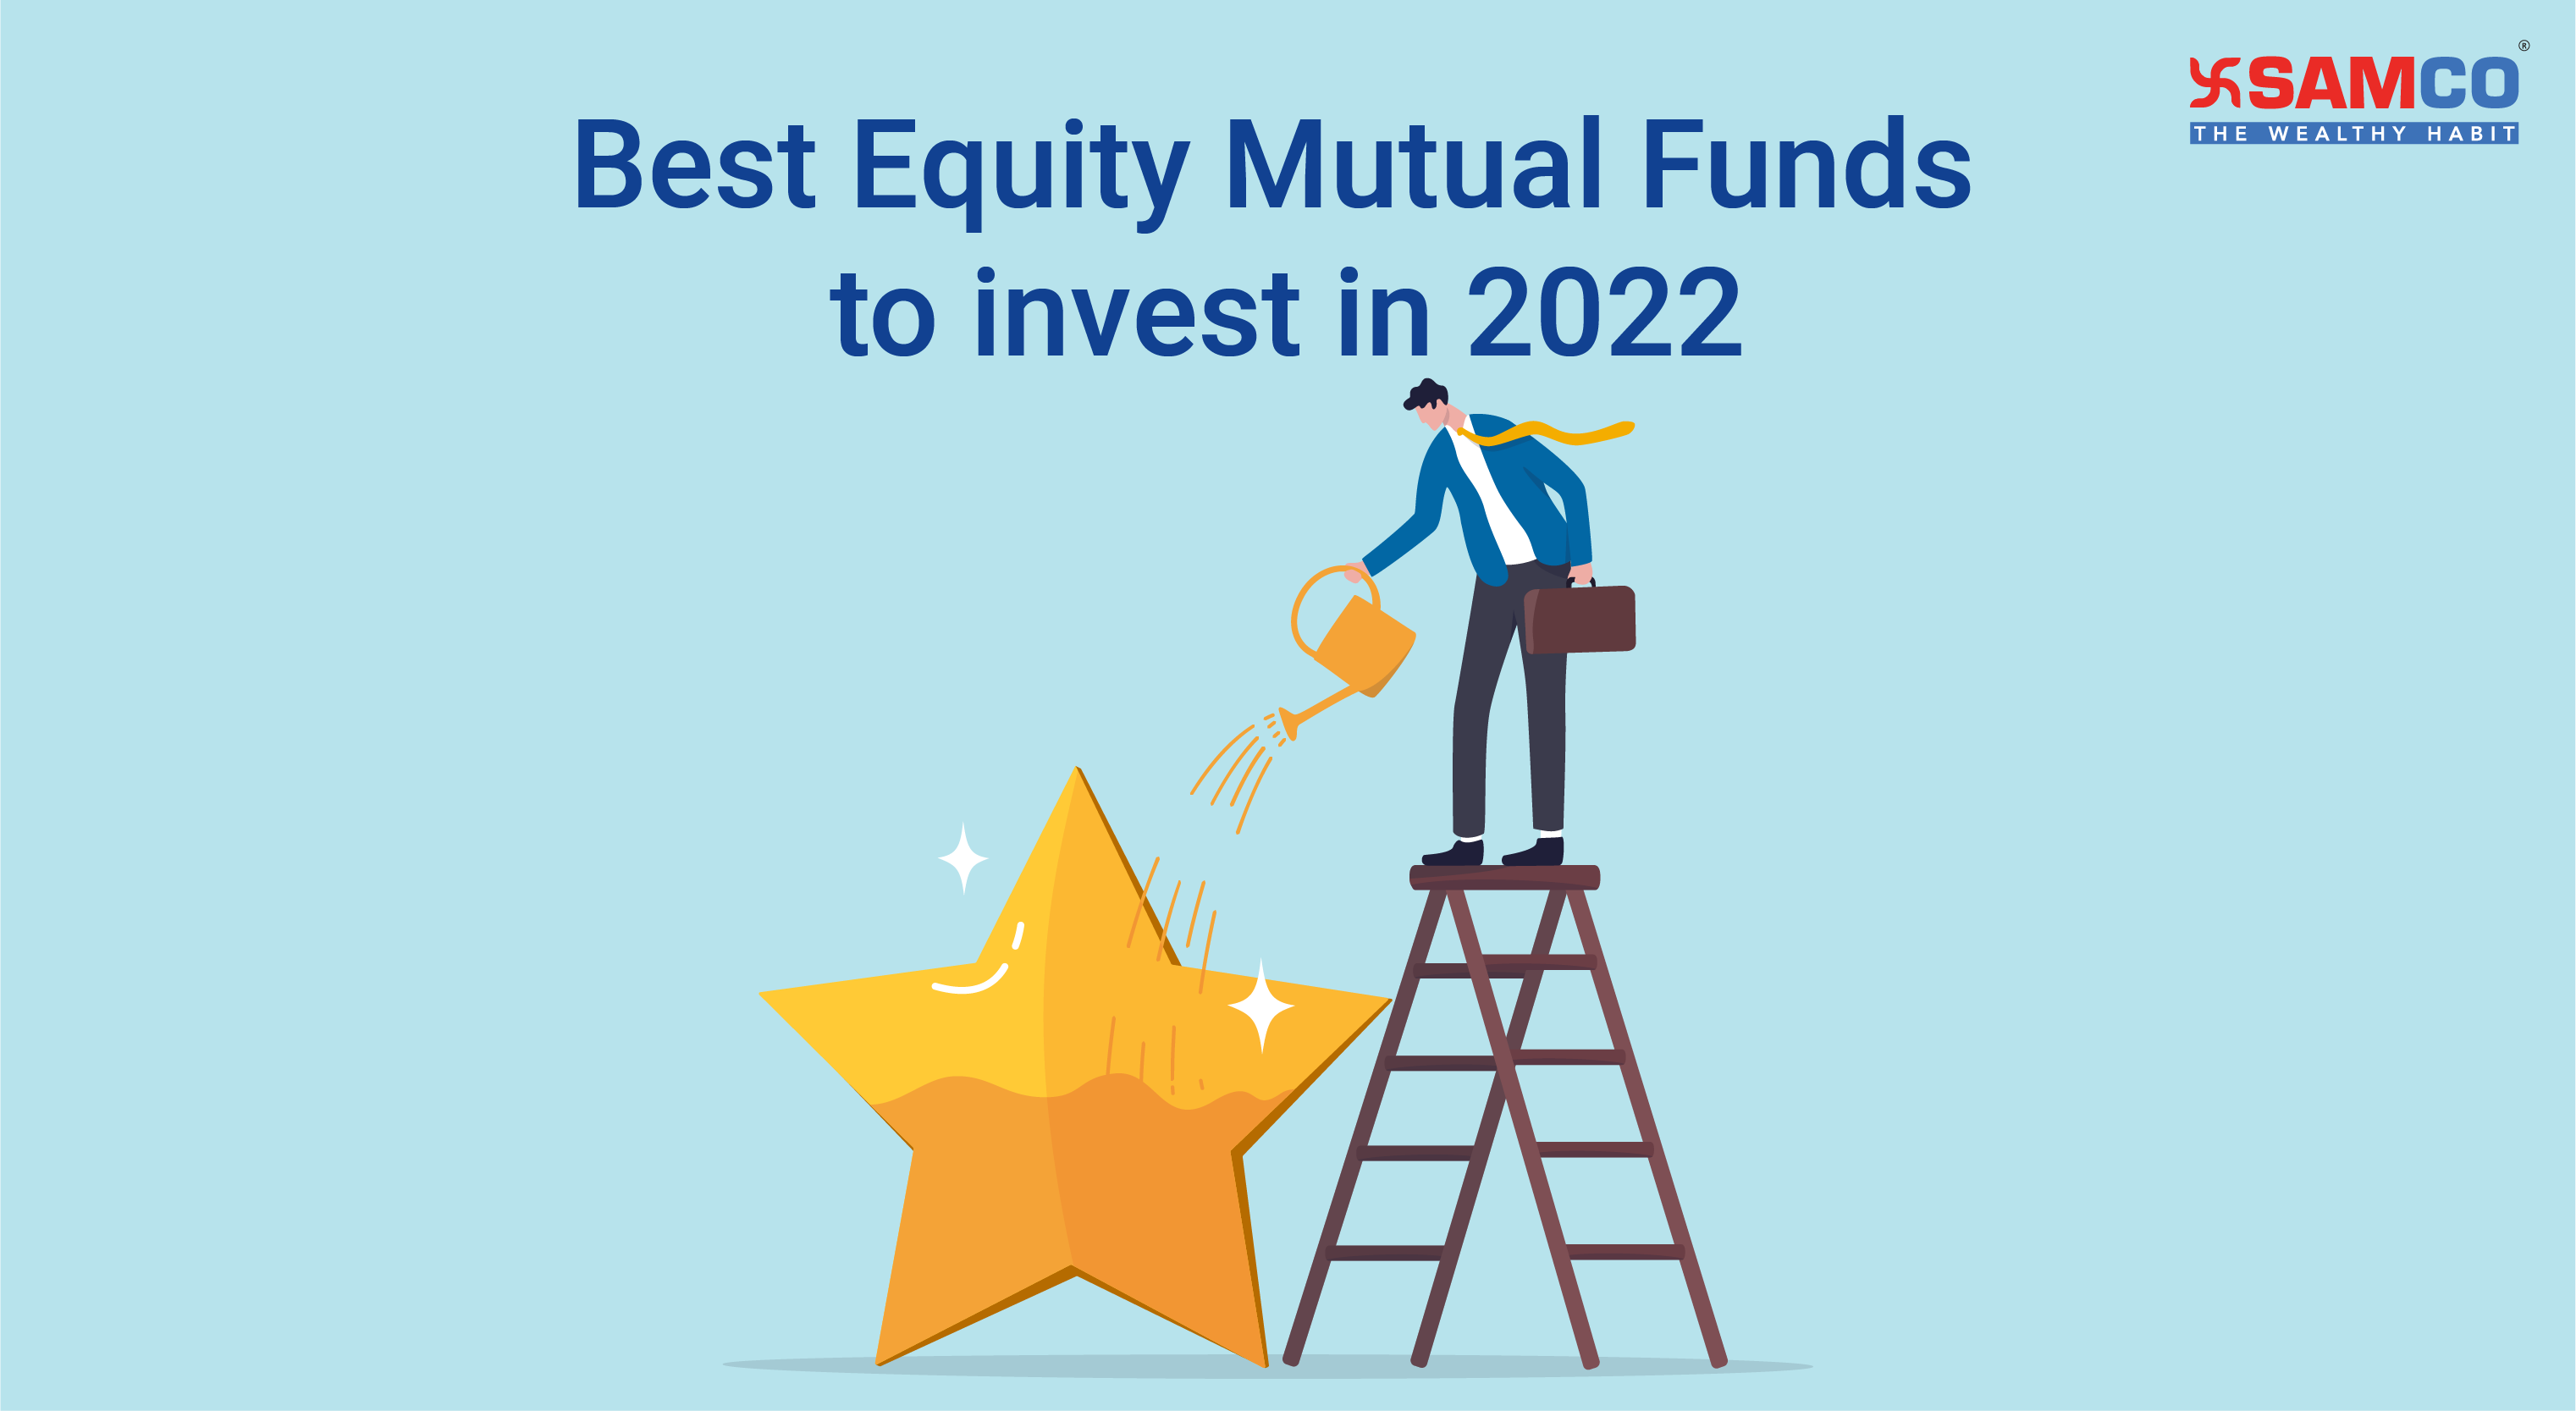 Best Equity Mutual Funds to invest in 2022